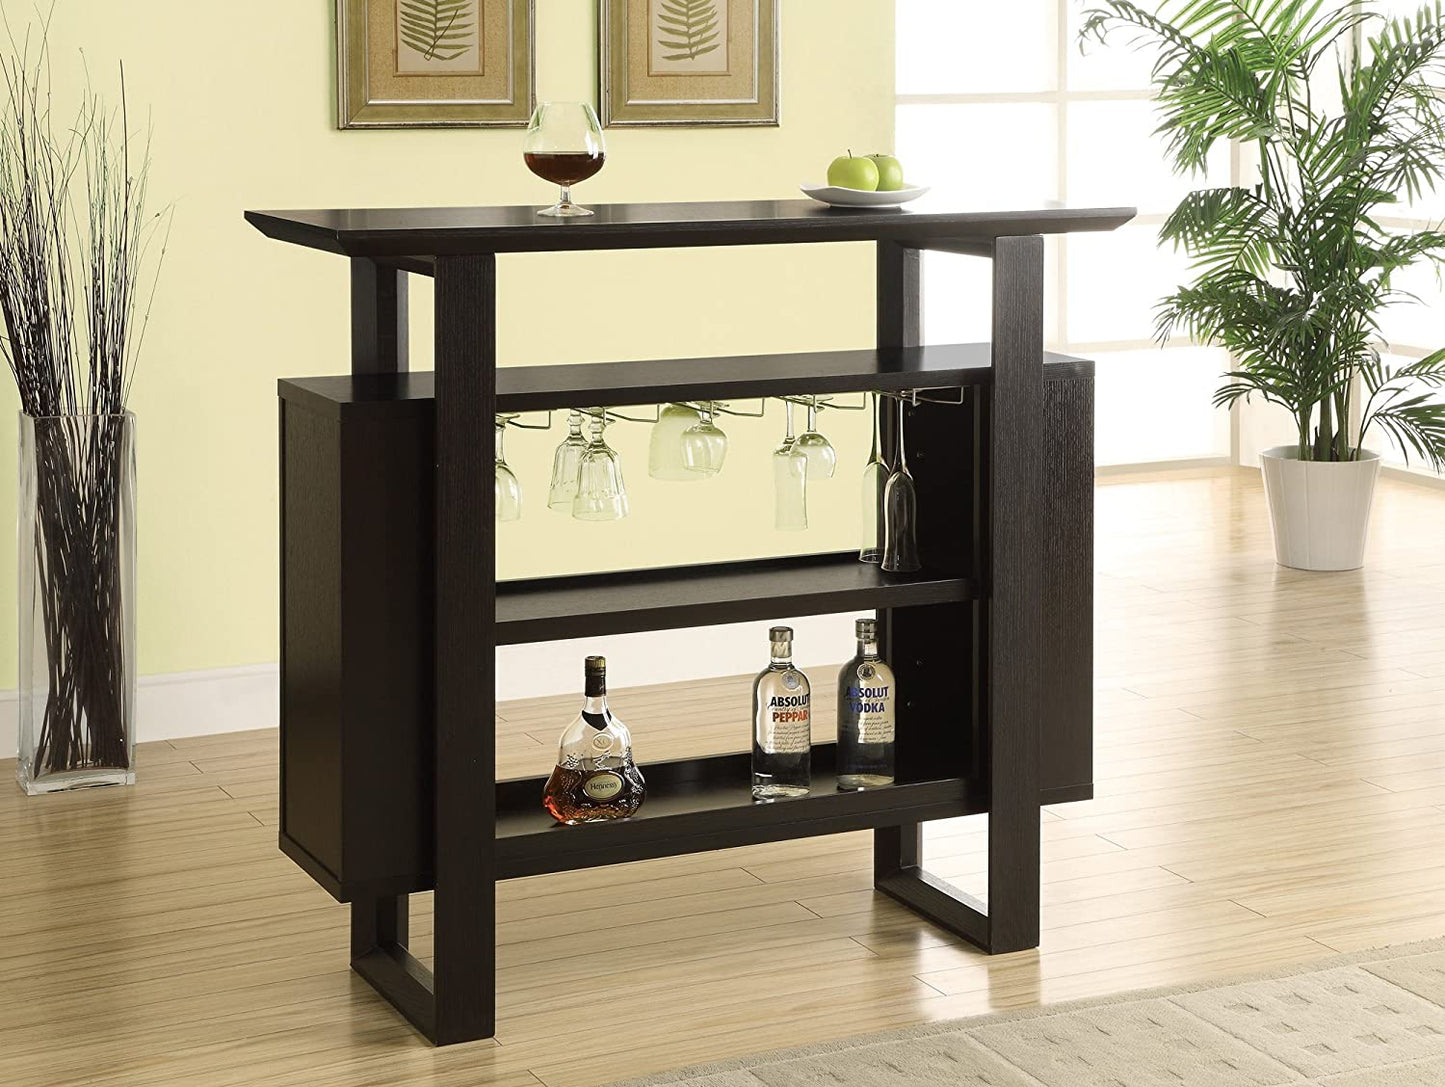 Bar Cabinet: Bar Unit with Bottle and Glass Storage, Cappuccino 